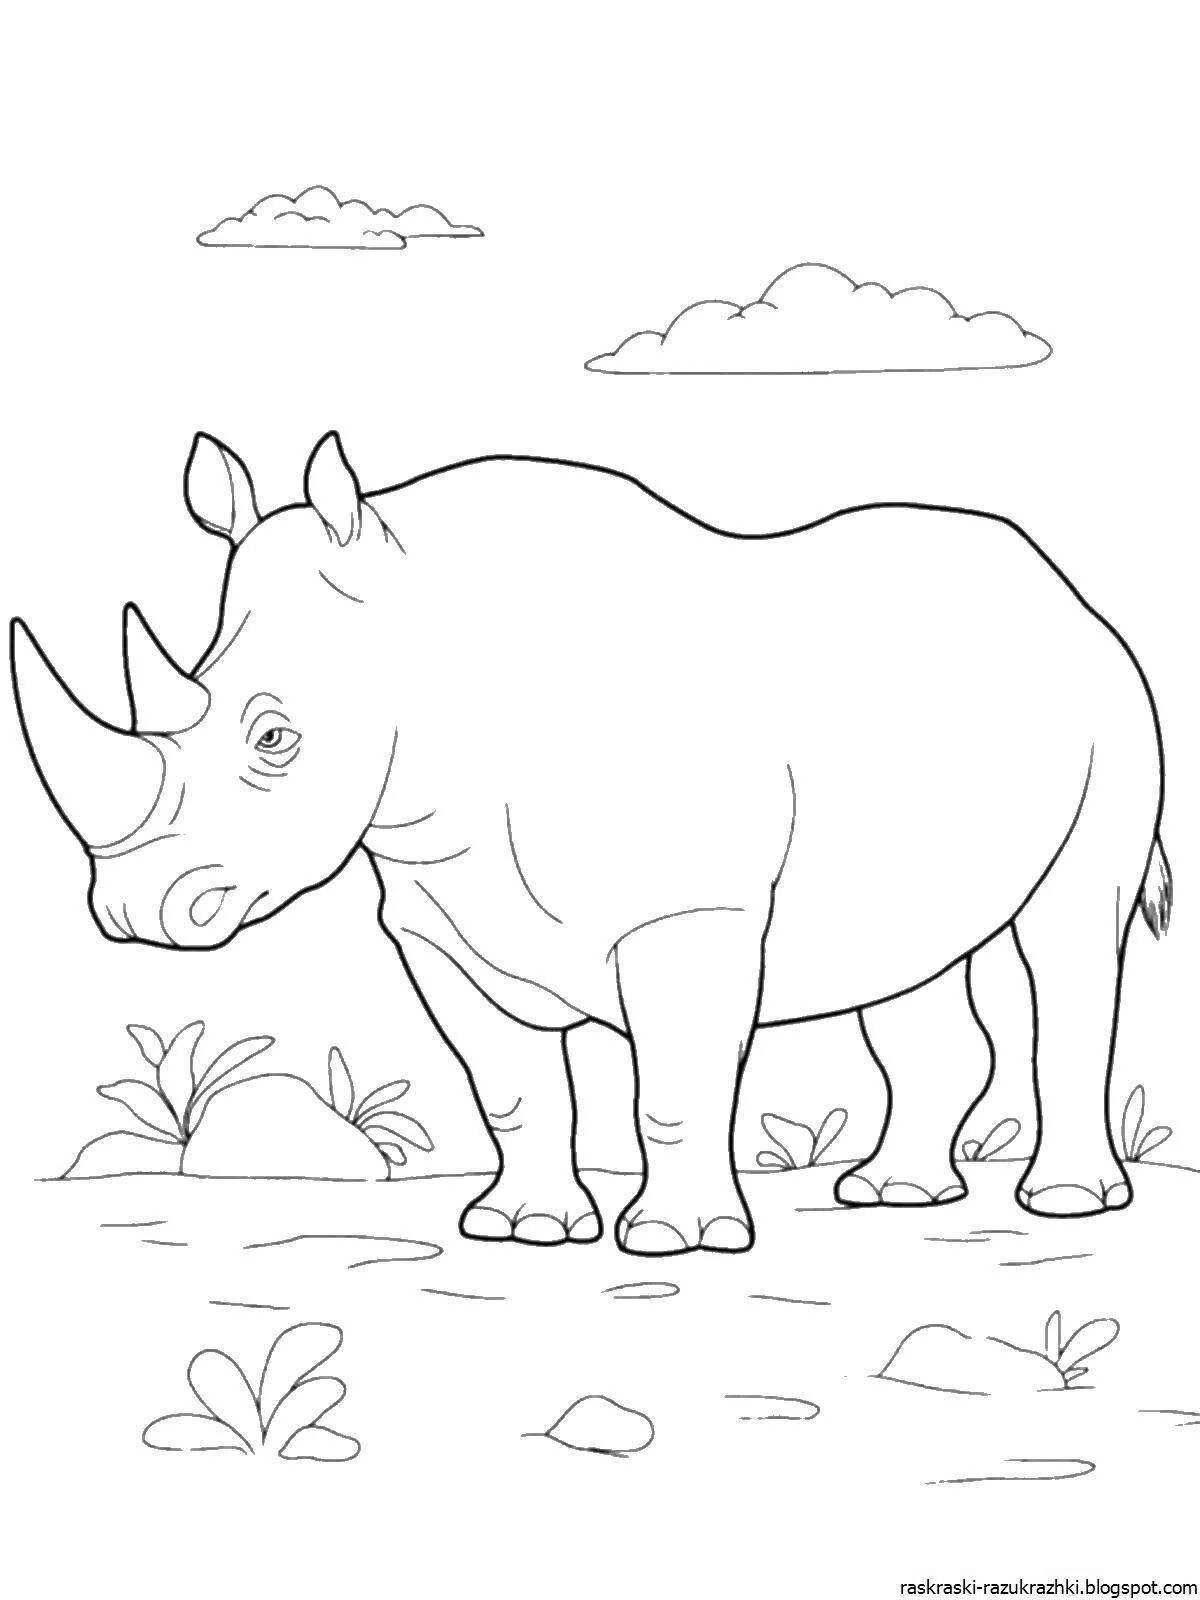 Innovative African Animals Coloring Page for 3-4 year olds